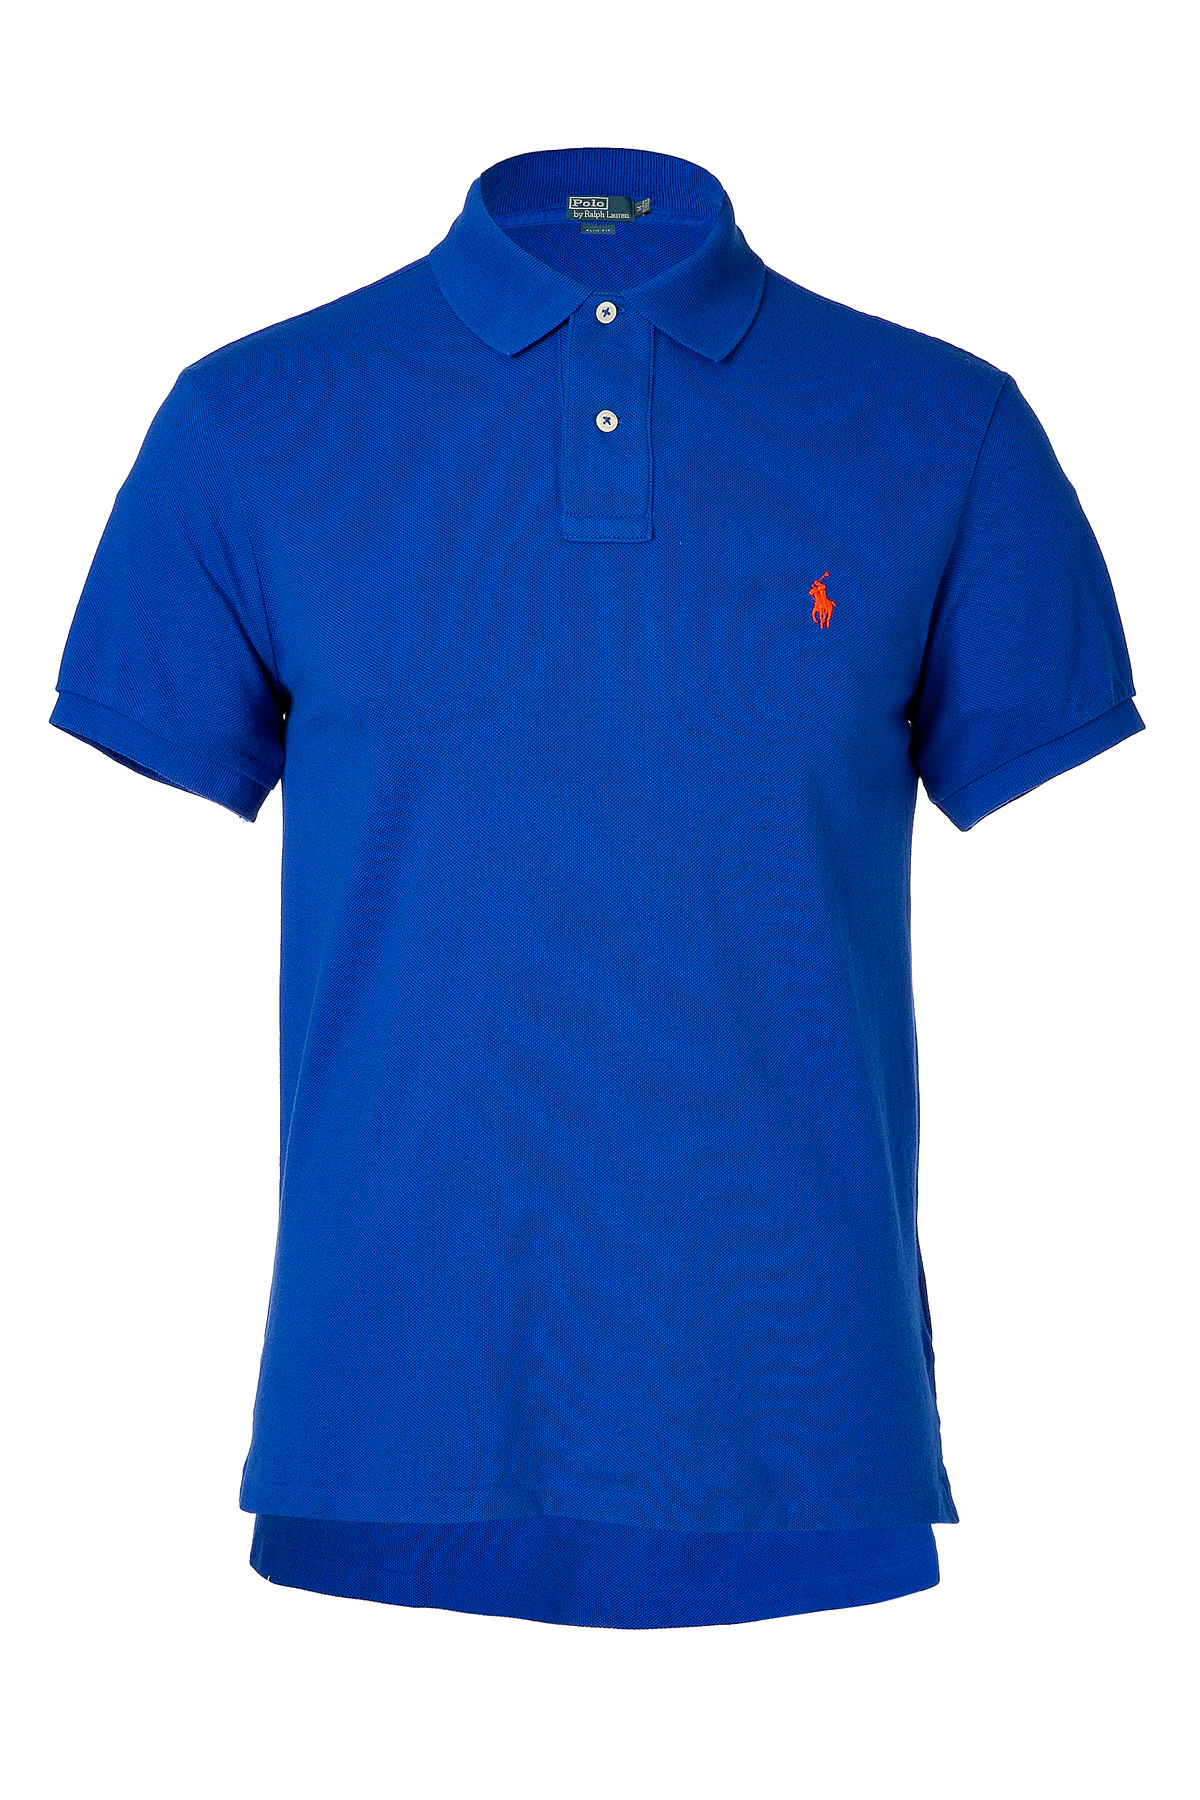 Ralph Lauren Pacific Royal Solid Weathered Mesh Slim Fit Polo Shirt in ...